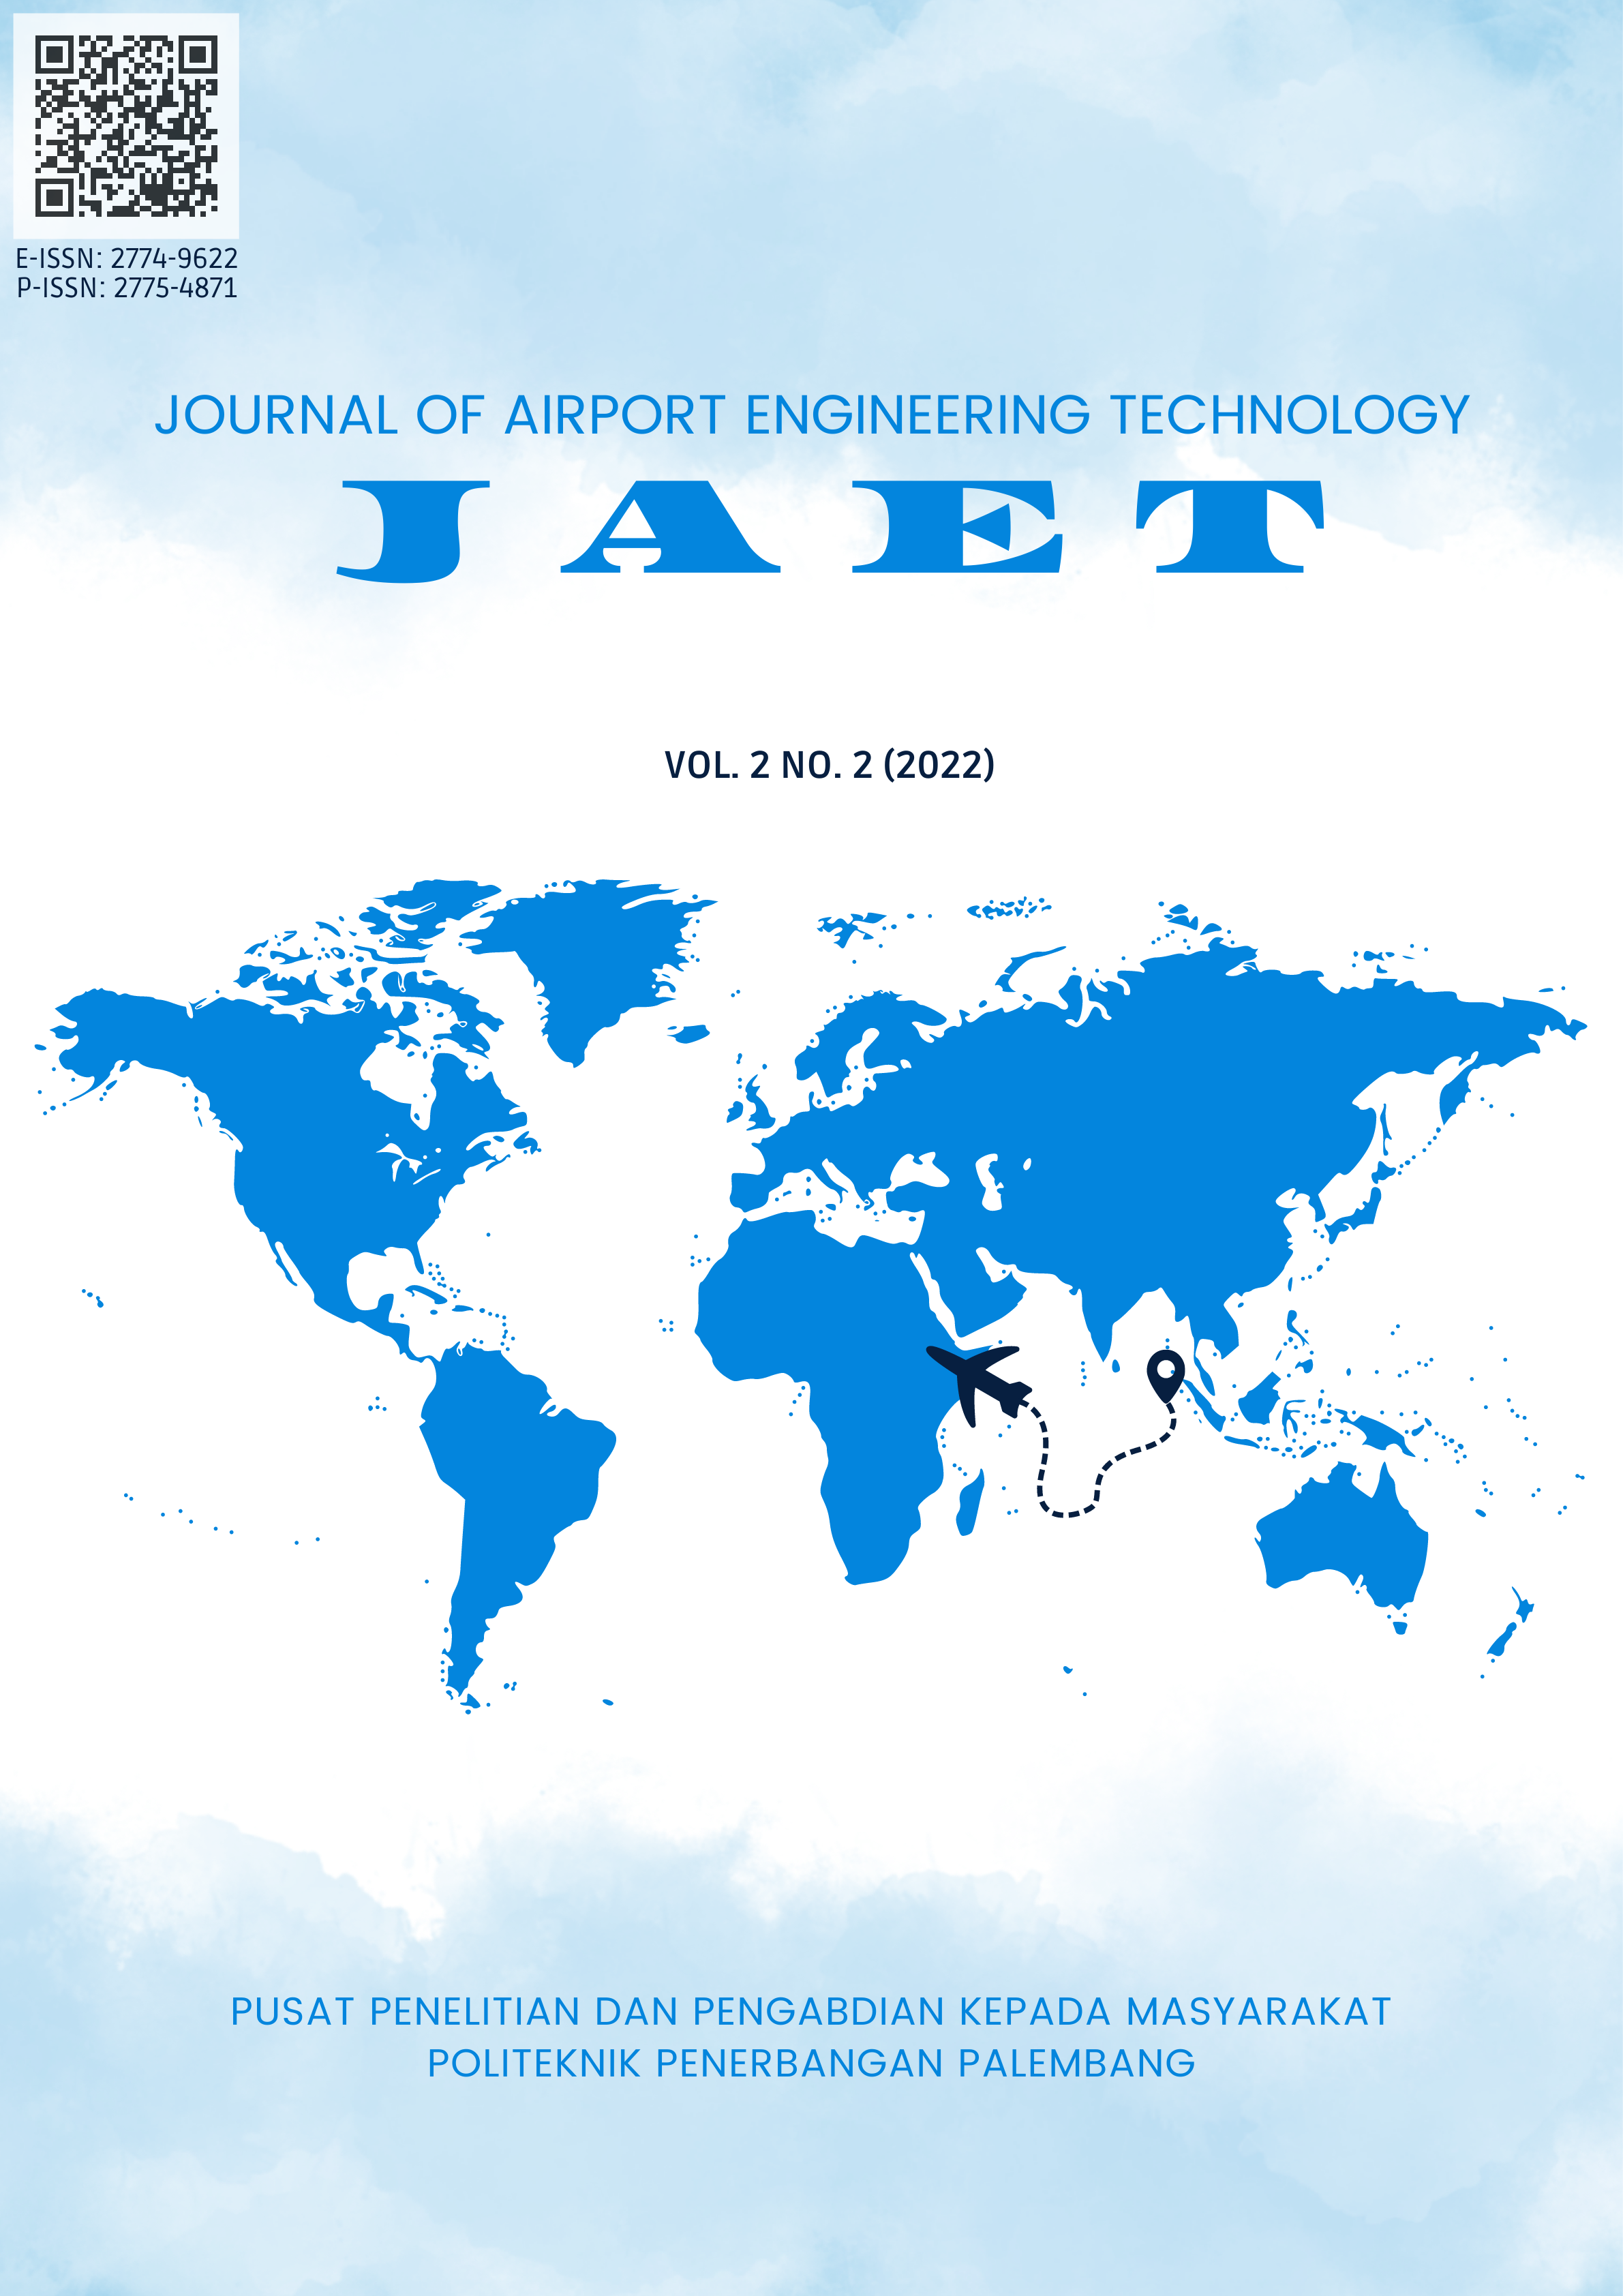 					View Vol. 2 No. 2 (2022): Journal of Airport Engineering Technology (JAET)
				